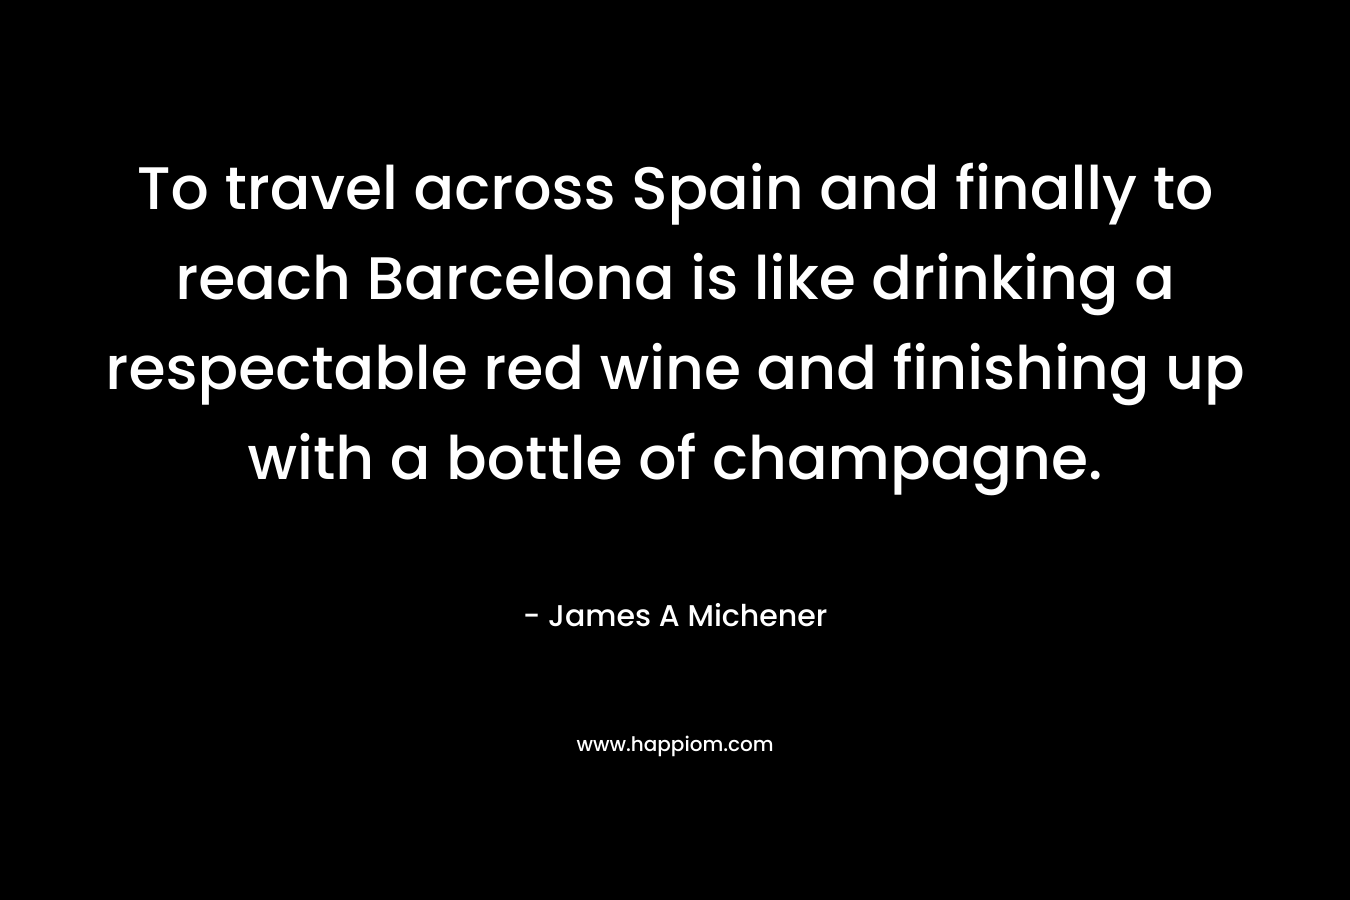 To travel across Spain and finally to reach Barcelona is like drinking a respectable red wine and finishing up with a bottle of champagne. – James A Michener